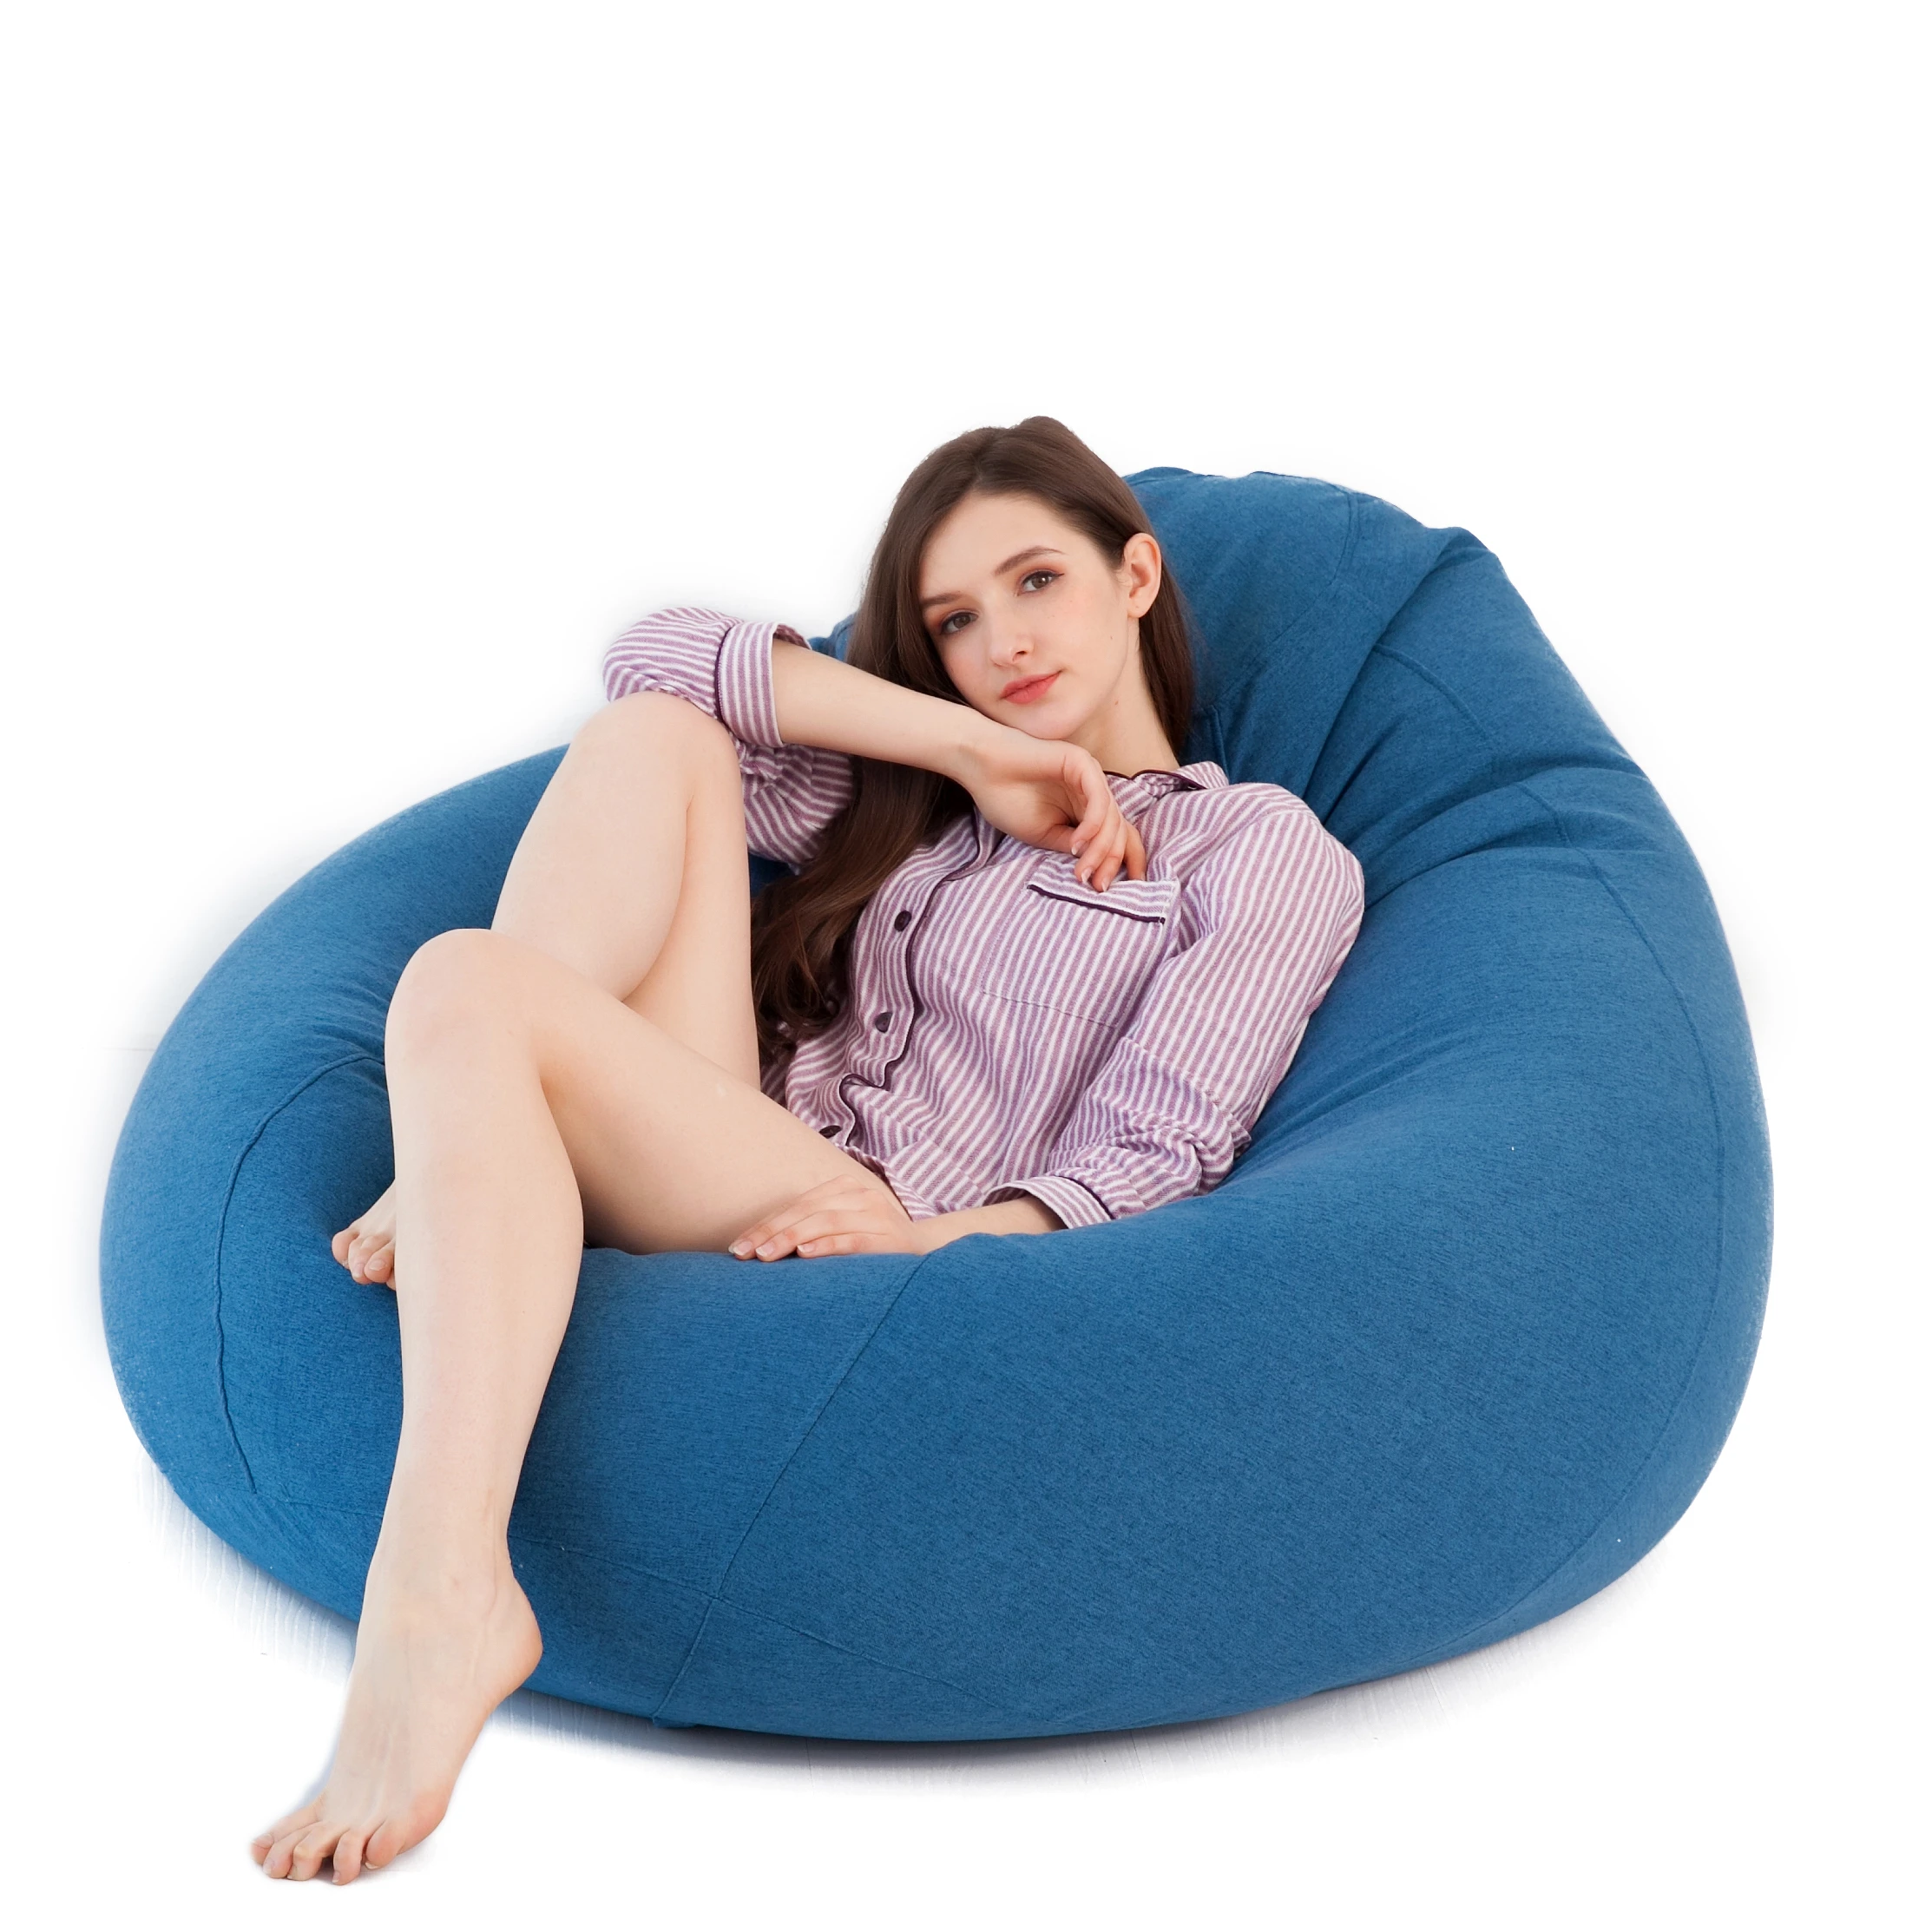 Extra Large Classic Bean Bag Chair Cover Indoor Outdoor Garden Beanbag Seat Stuffed Animal Toy Organizer Buy Bean Bag Bean Bag Chair Lazy Sofa Product On Alibaba Com